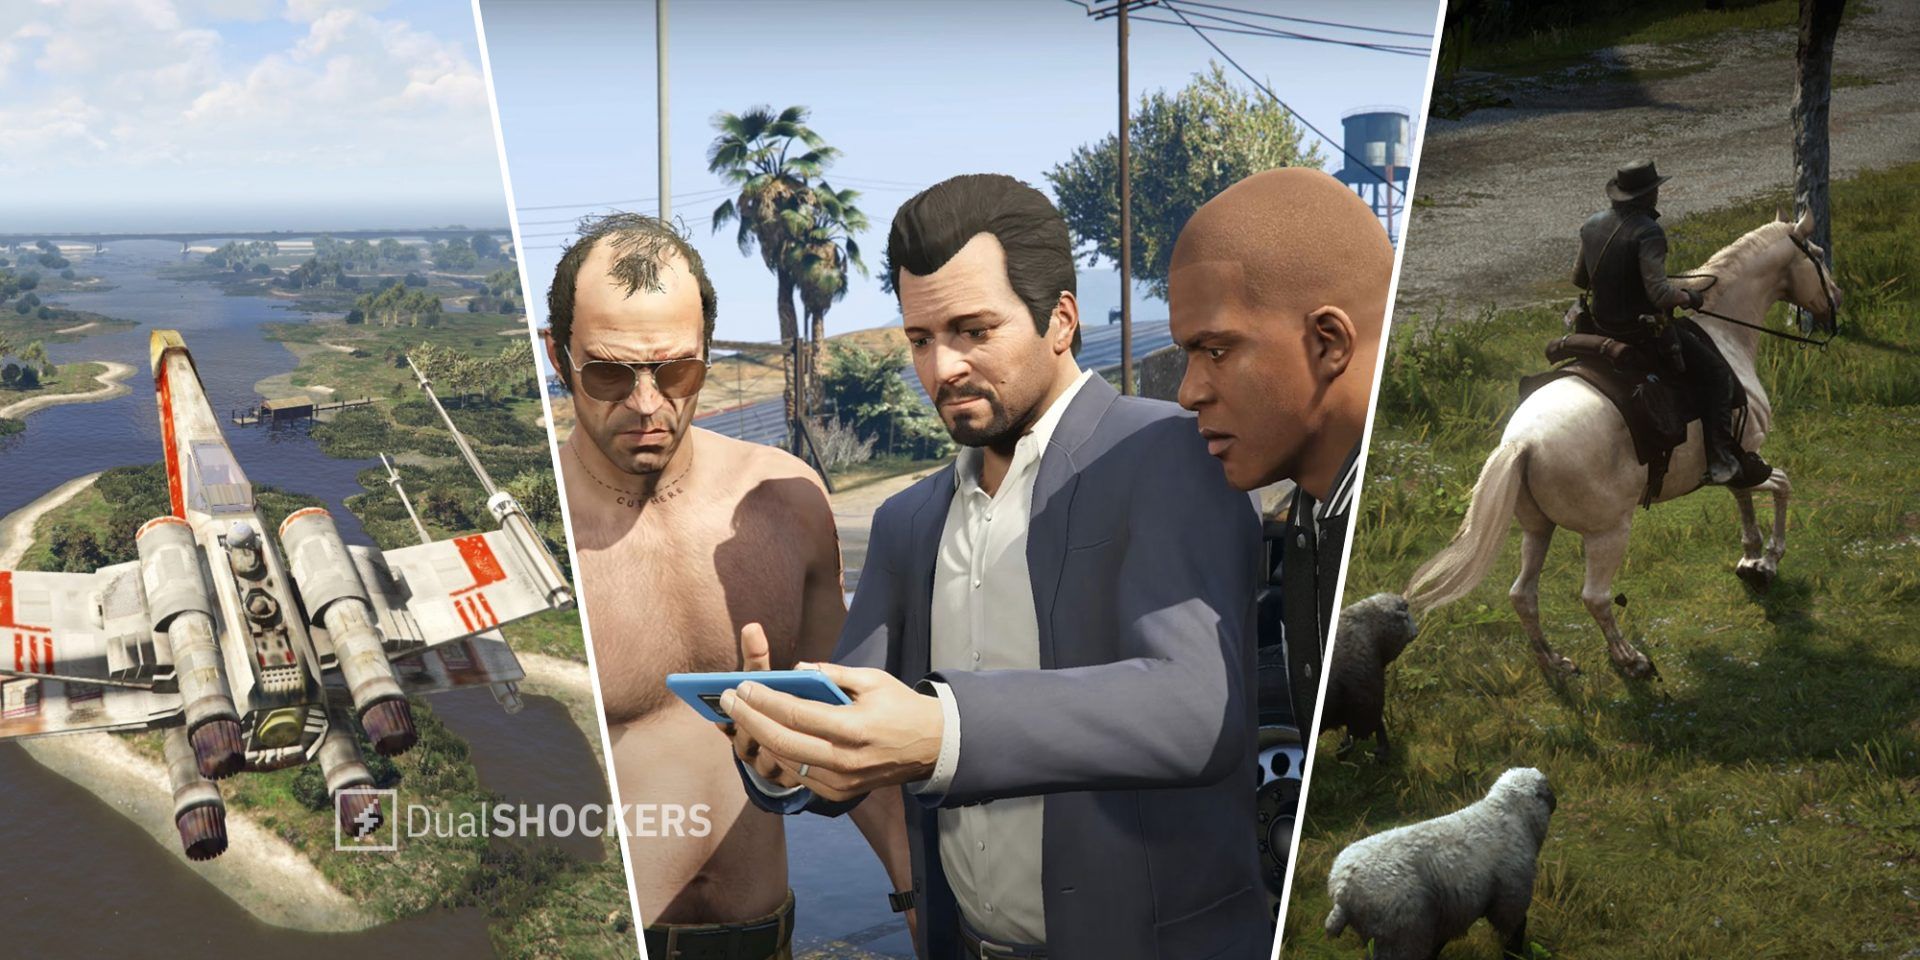 Grand Theft Auto 5 Star Wars x-wing mod on left, GTA 5 characters looking at a phone in middle, Red Dead Redemption 2 shepherd mod on right